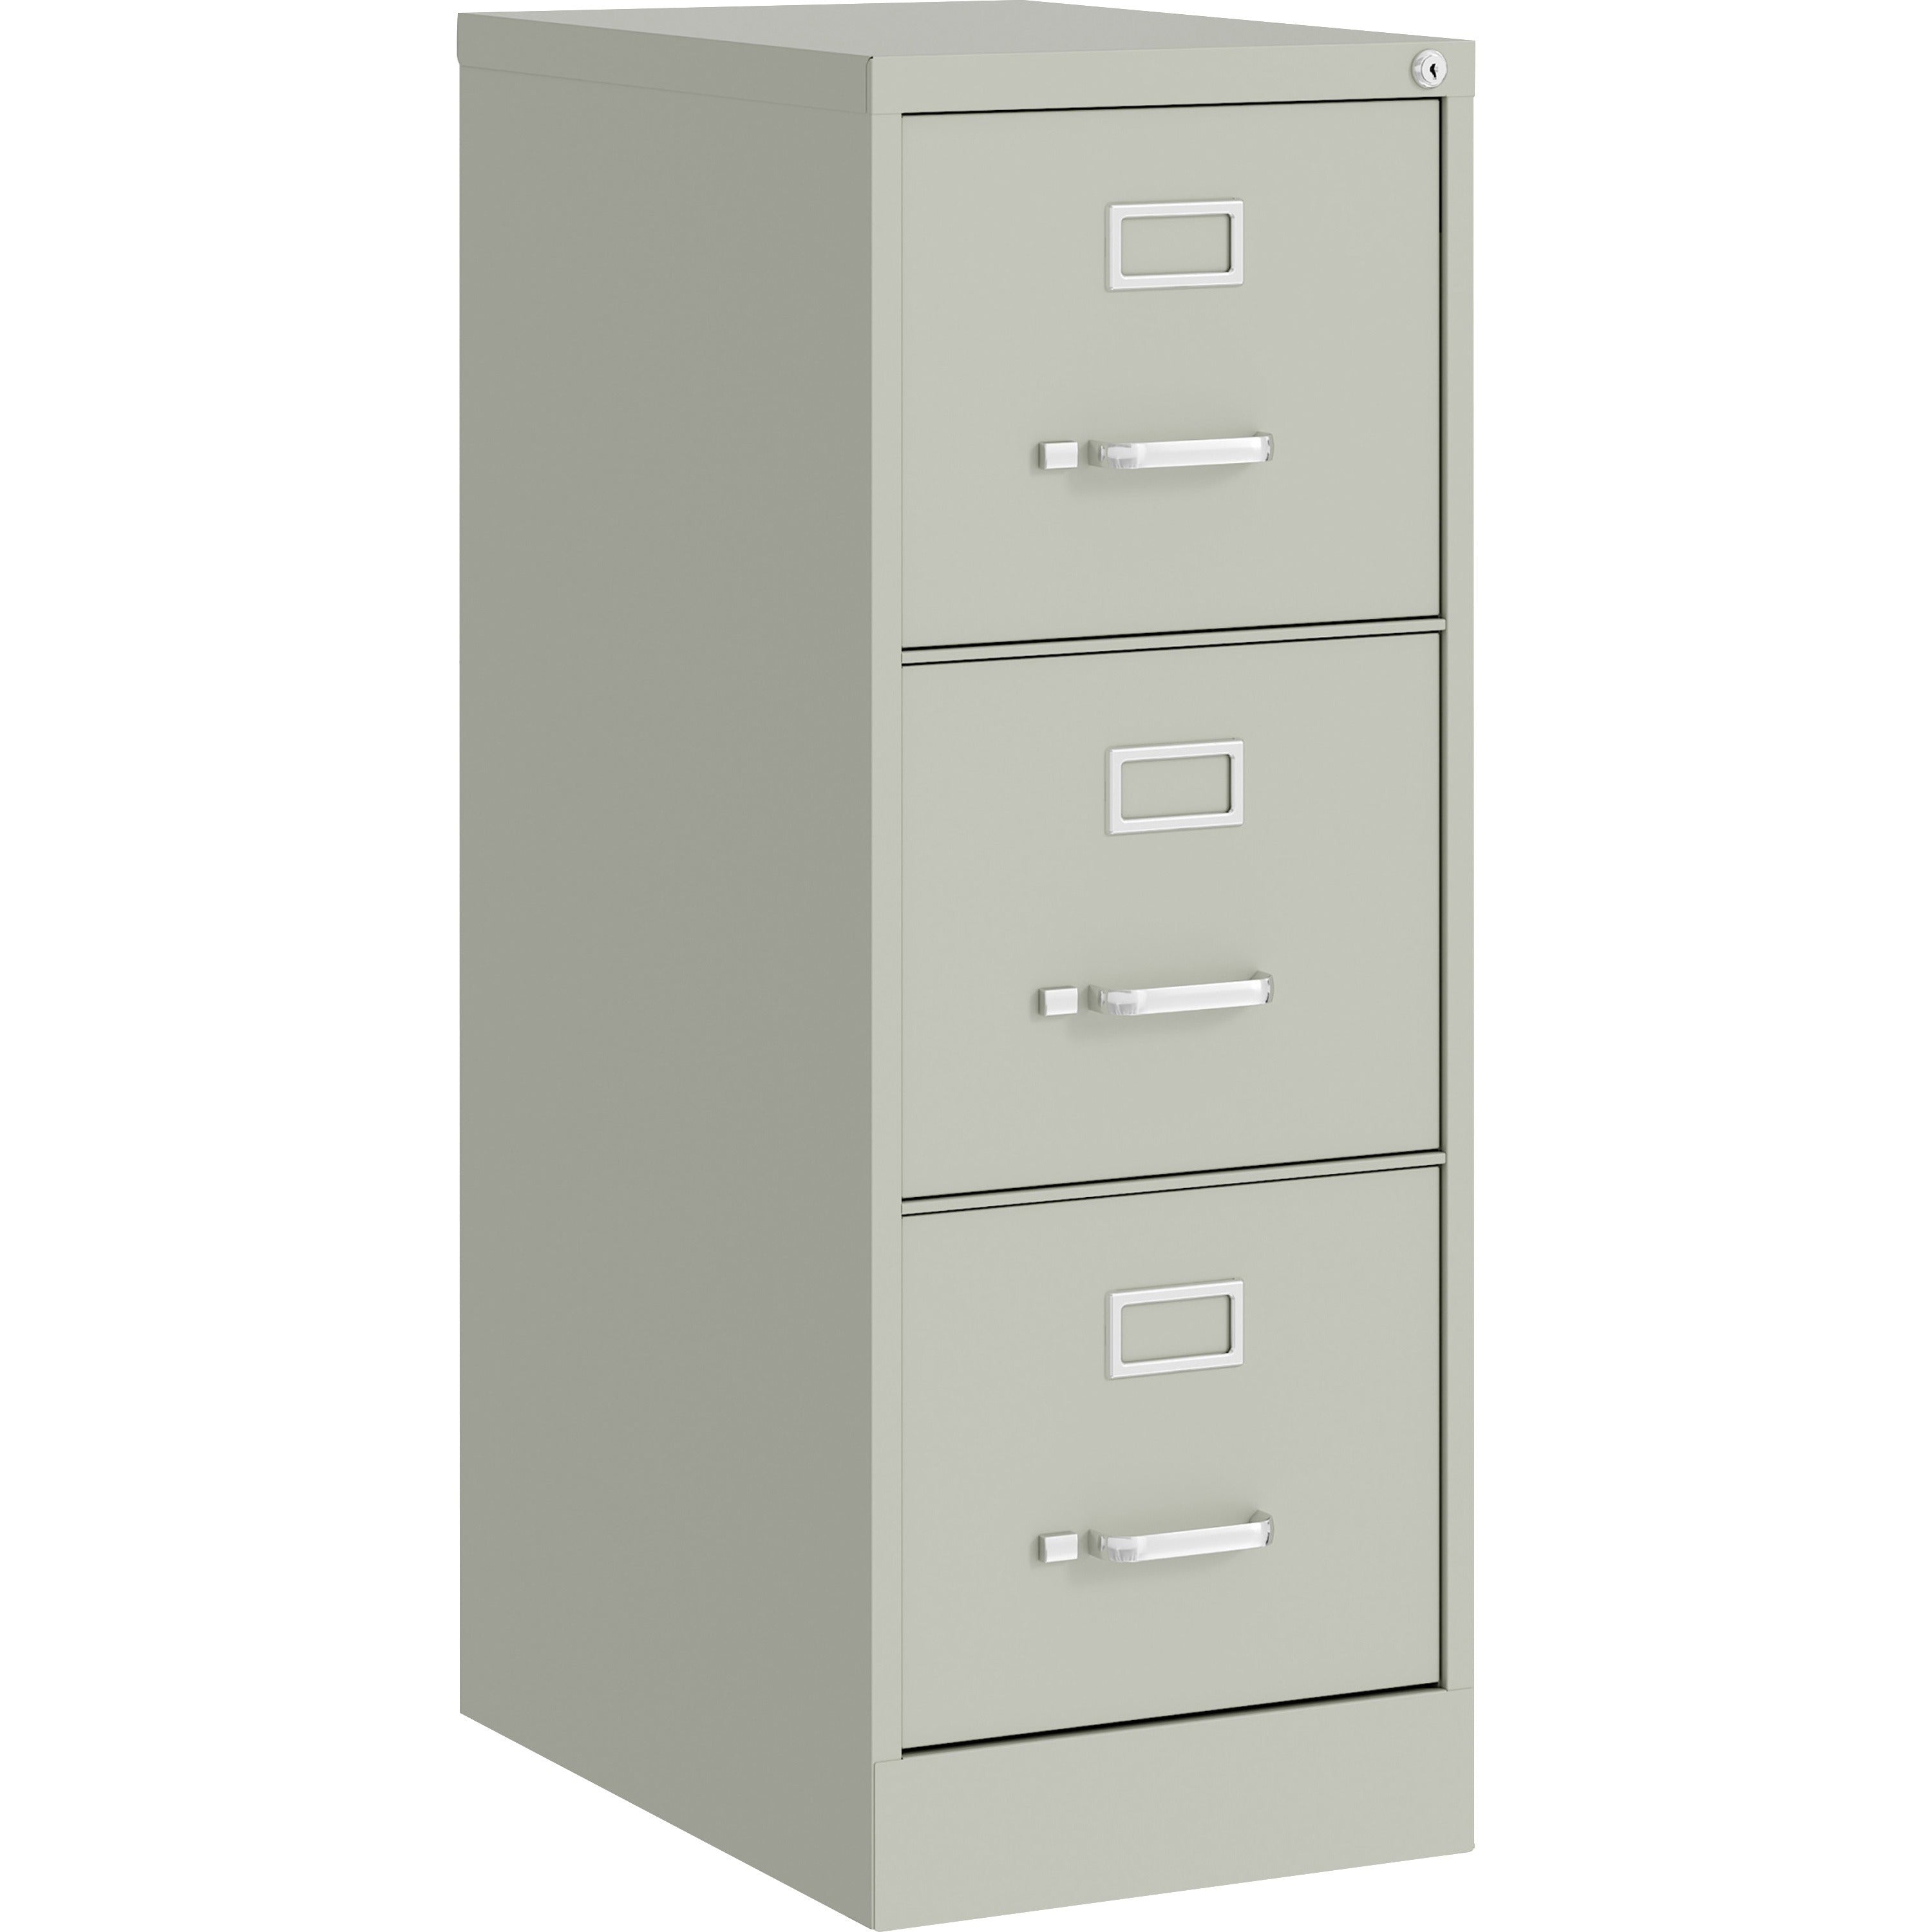 lorell-fortress-series-22-commercial-grade-vertical-file-cabinet-15-x-22-x-402-3-x-drawers-for-file-letter-vertical-ball-bearing-suspension-removable-lock-pull-handle-wire-management-light-gray-steel-recycled_llr42298 - 1